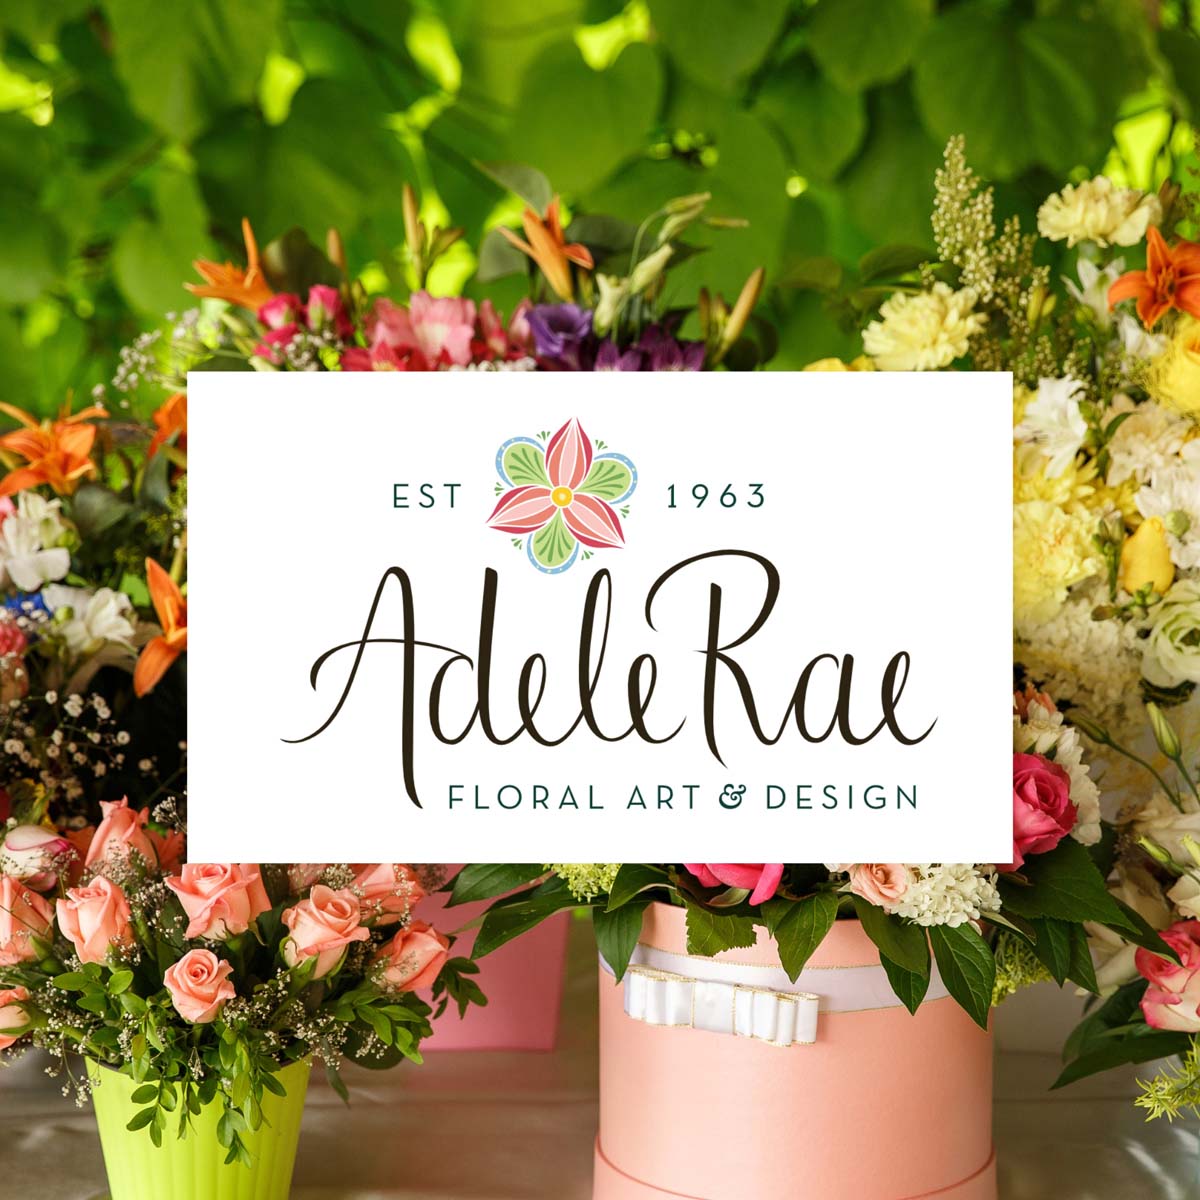 Get Fresh Flowers delivered to your doorstep in Vancouver Lower Mainland by Adele Rae Florist on UberEats